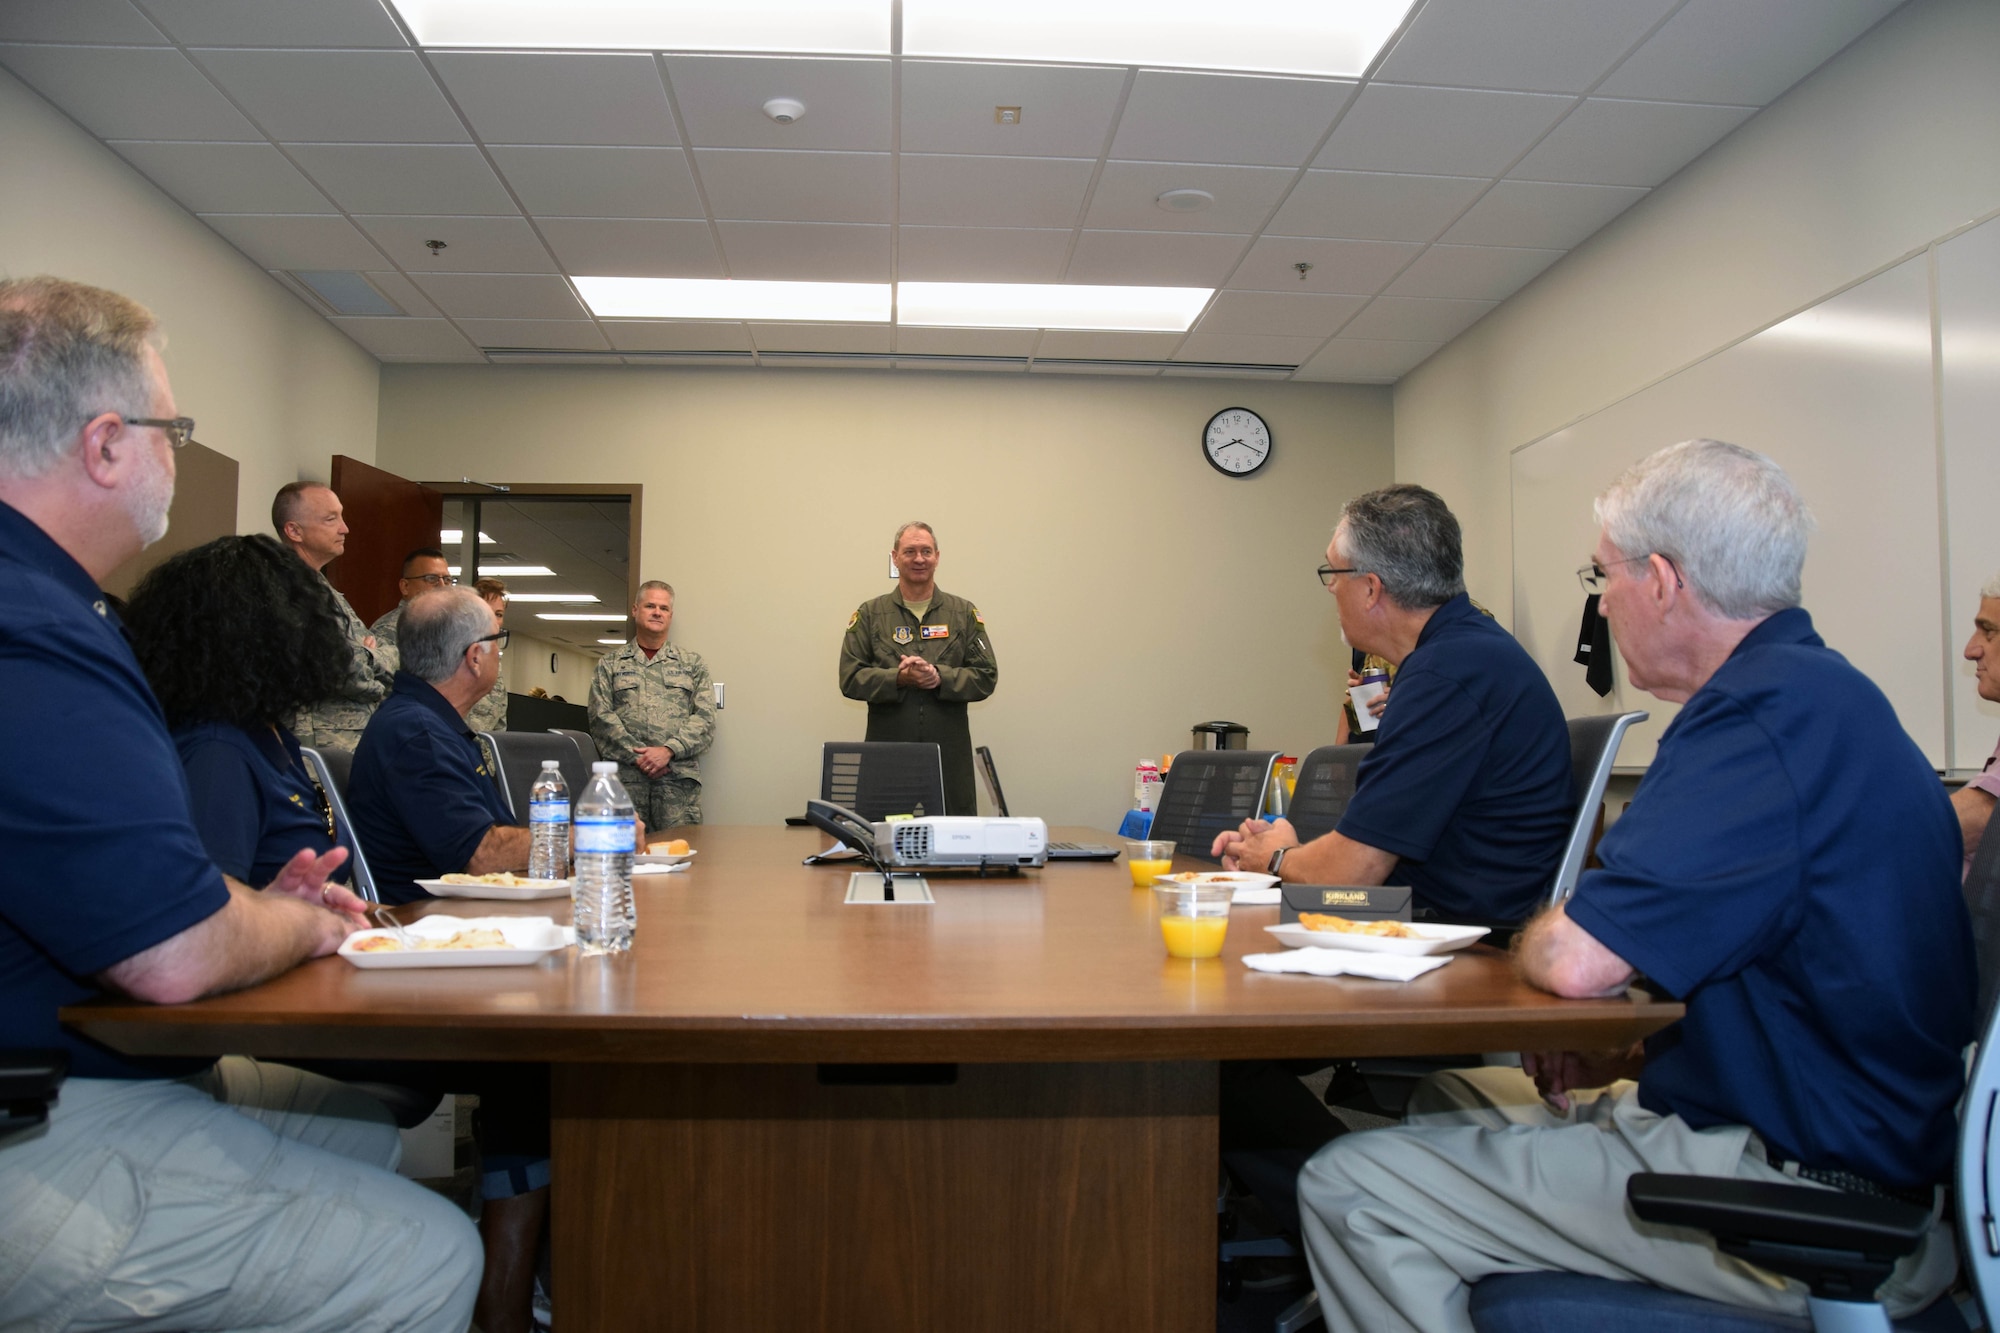 Col. Terry W. McClain, 433rd Airlift Wing commander, welcomes the honorary commanders during a round-table discussion at the start of a tour of the 433rd Medical Group at Joint Base San Antonio-Lackland, Texas Oct. 5, 2019.